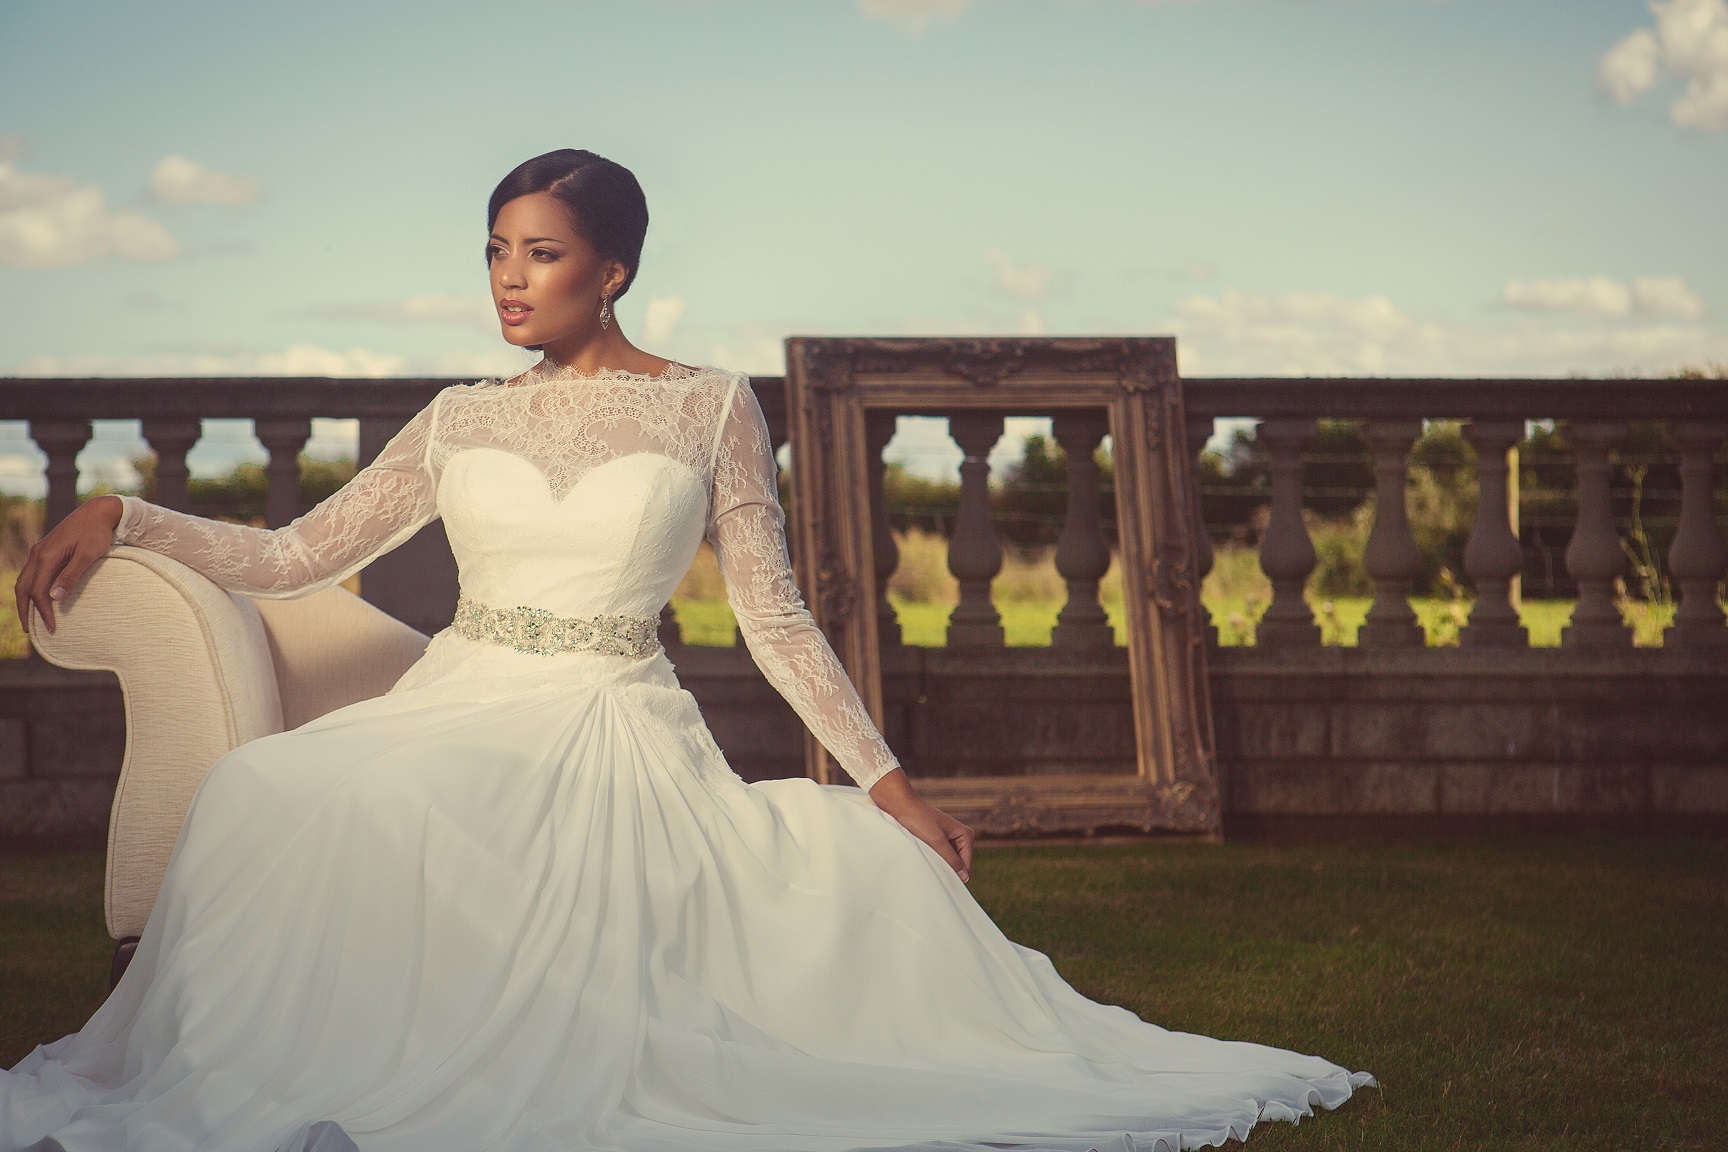 Top Wedding Dress Shops In Milton Keynes of all time The ultimate guide 